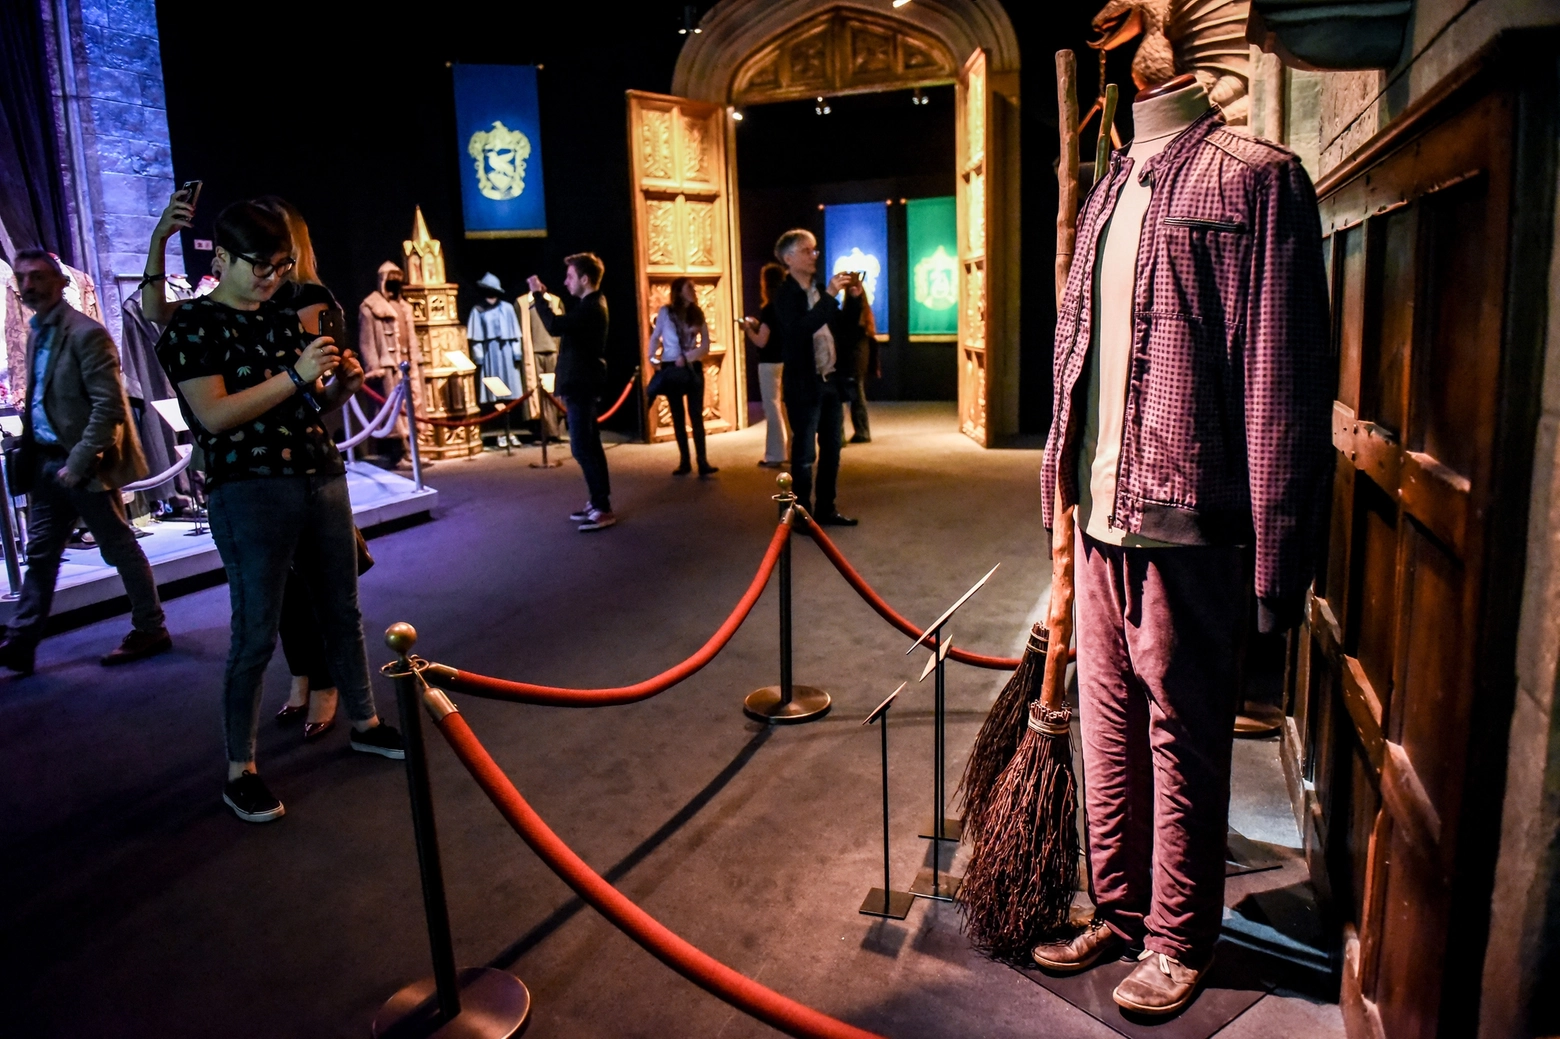 Anteprima mostra 'Harry Potter The Exhibition'